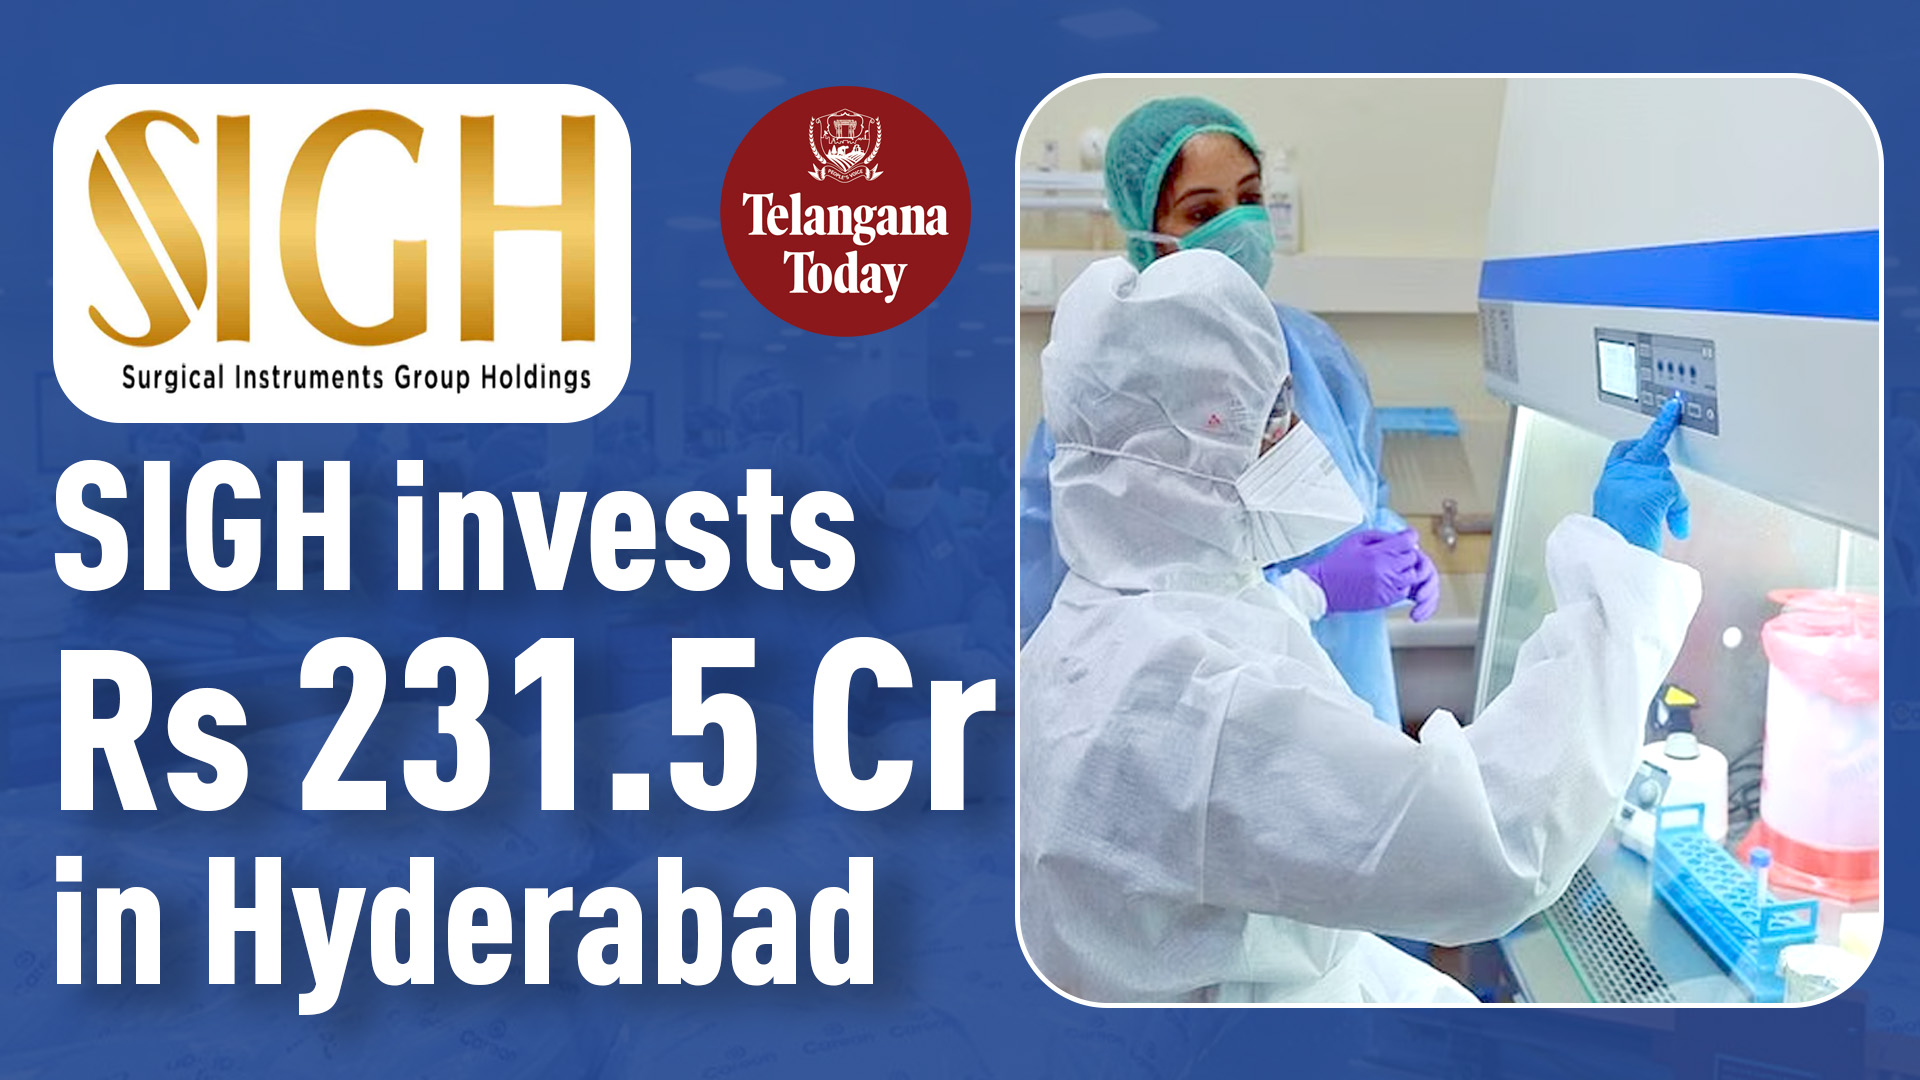 New Healthcare Device Manufacturing In Hyderabad | Surgical Instruments Group Holdings (SIGH)